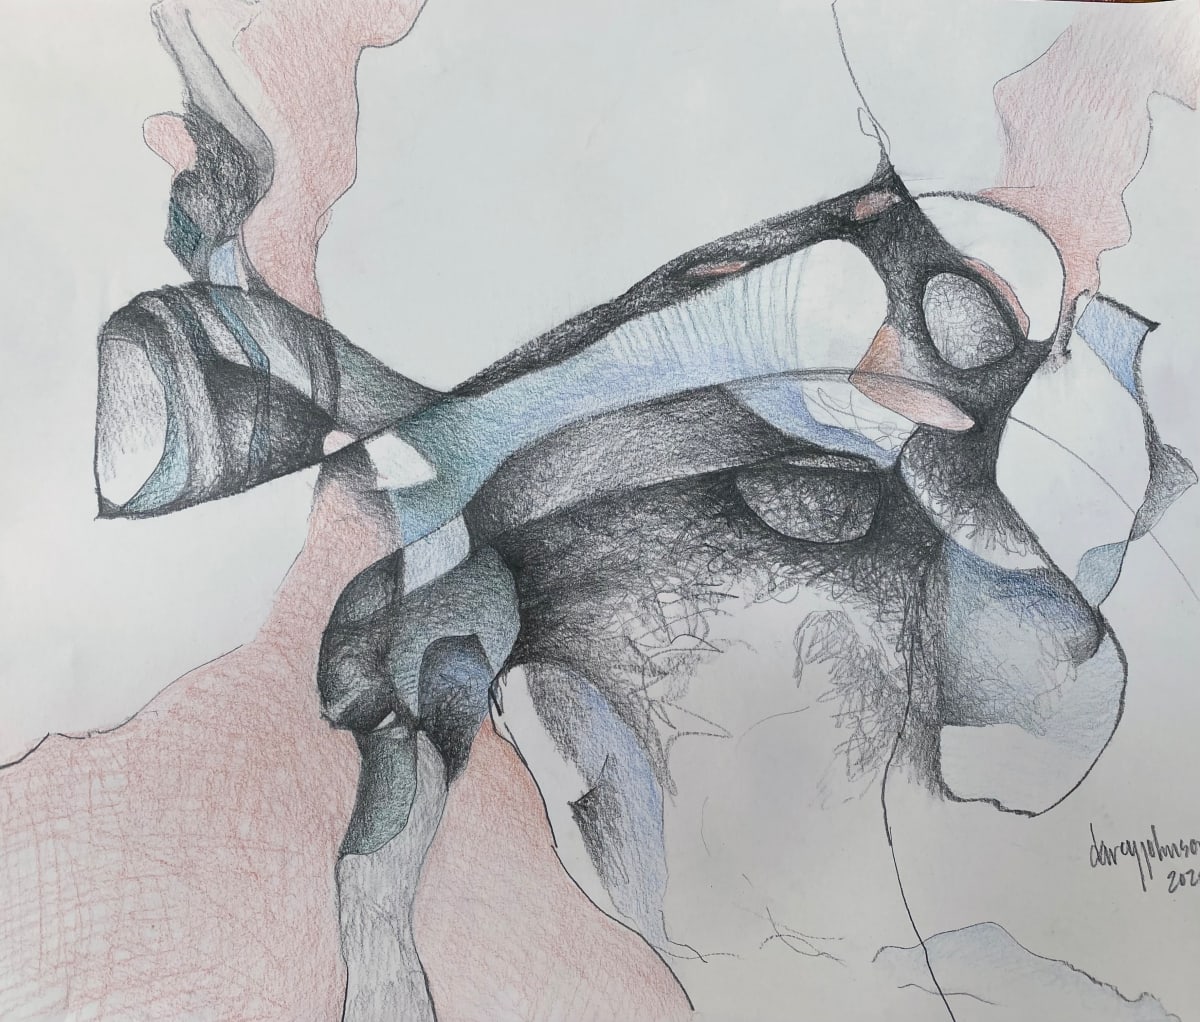 Echo by Darcy Johnson  Image: 'Echo',  graphite and pencil crayon on paper